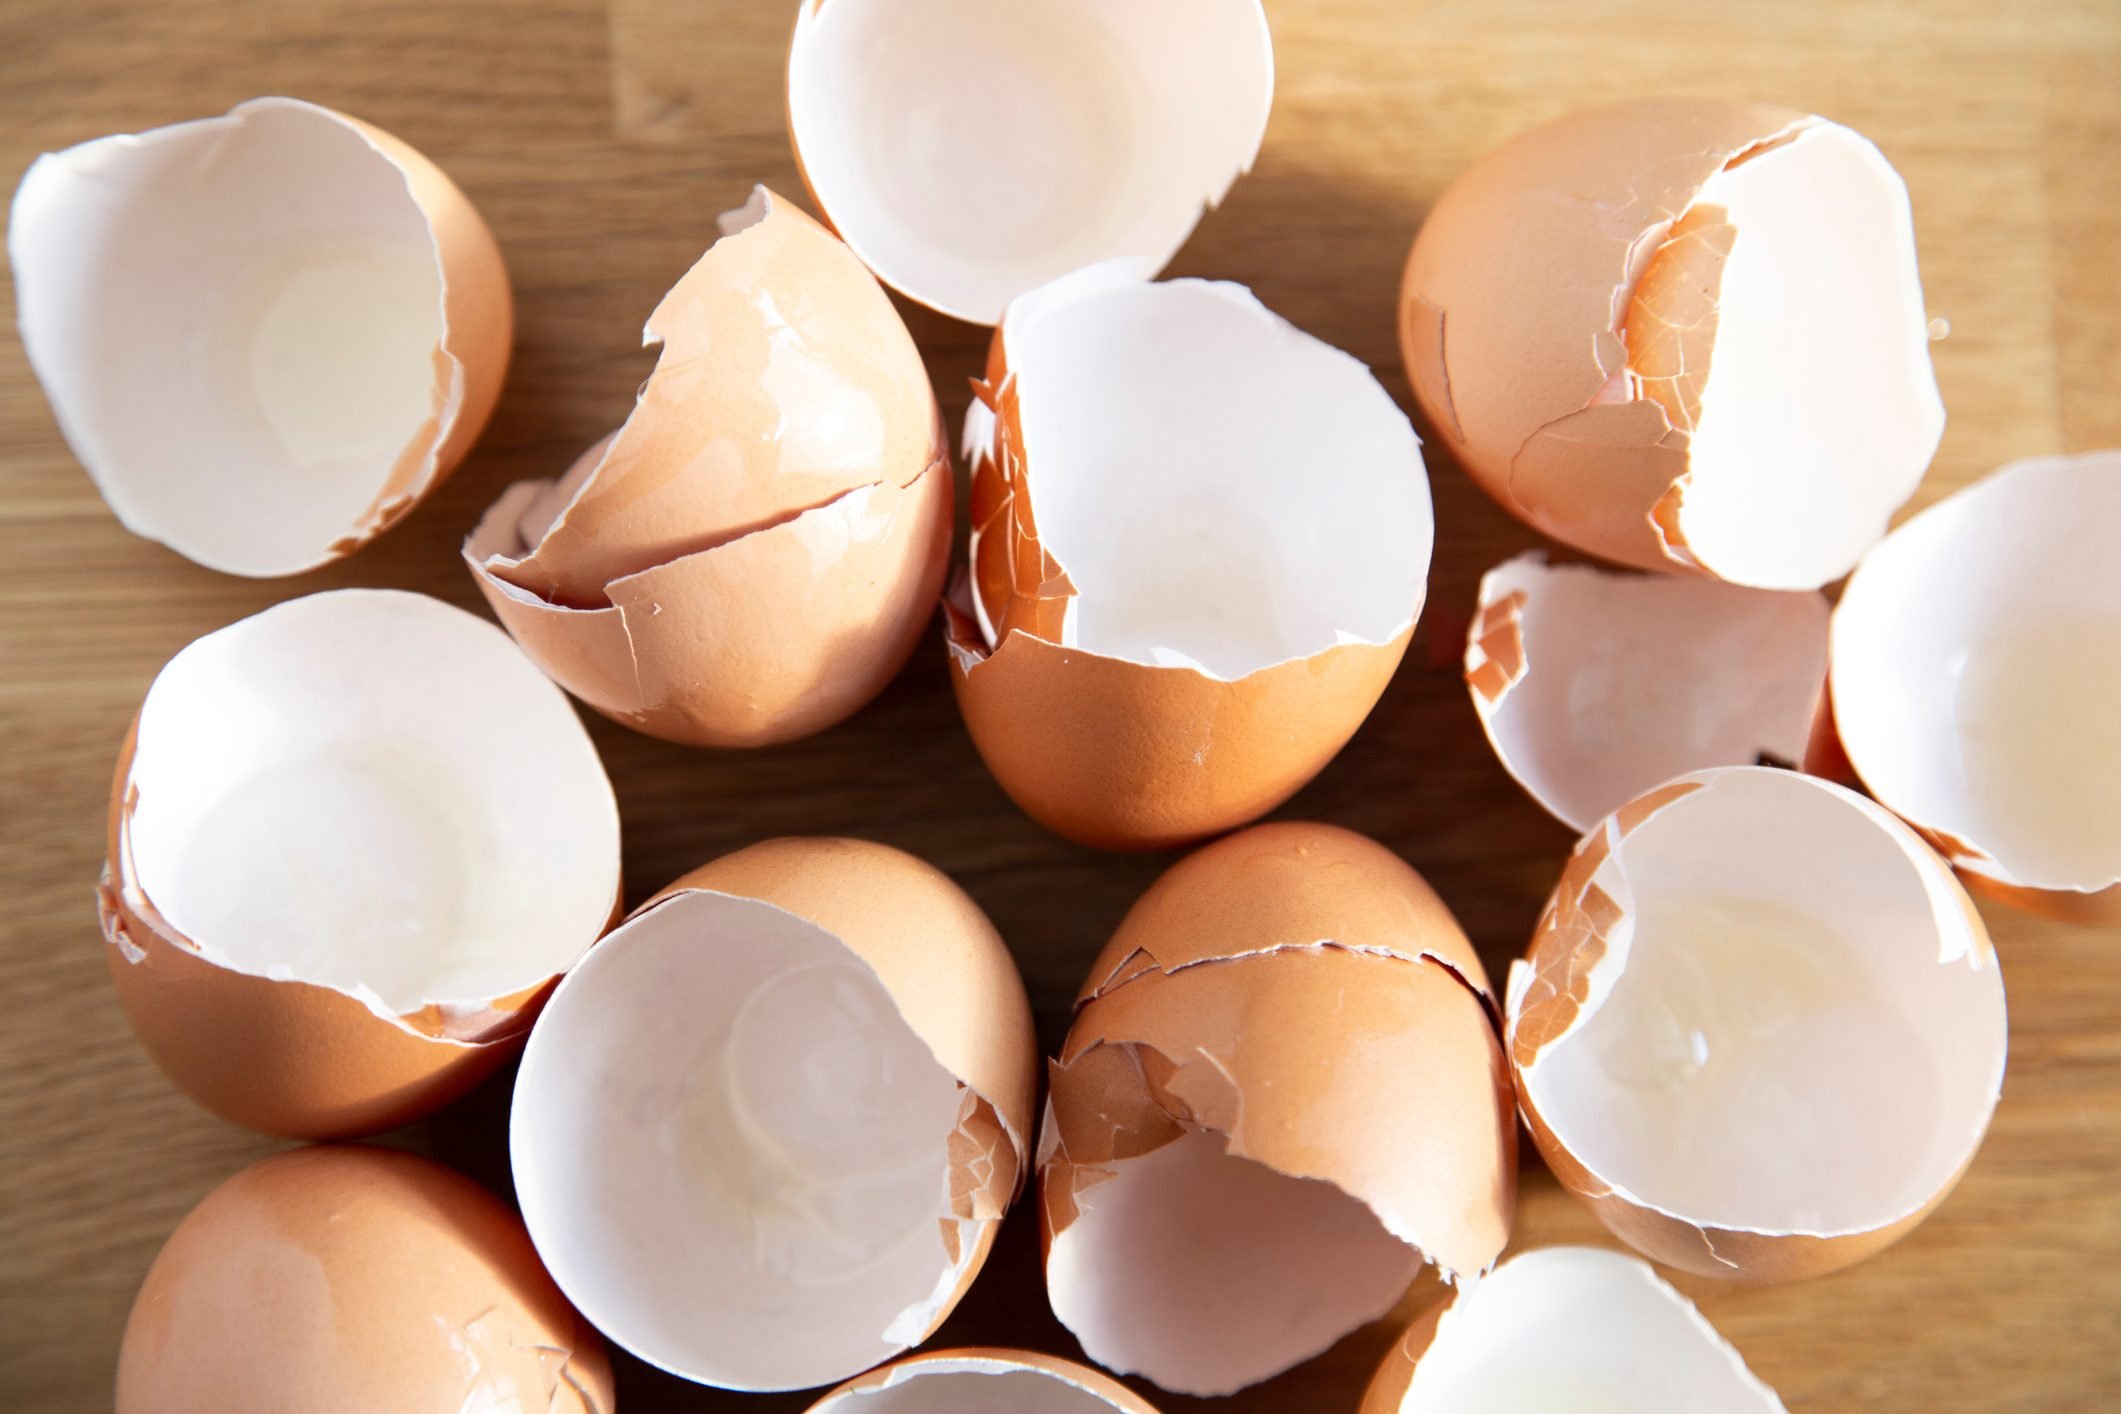 7 Ways to Use Eggshells in the Garden